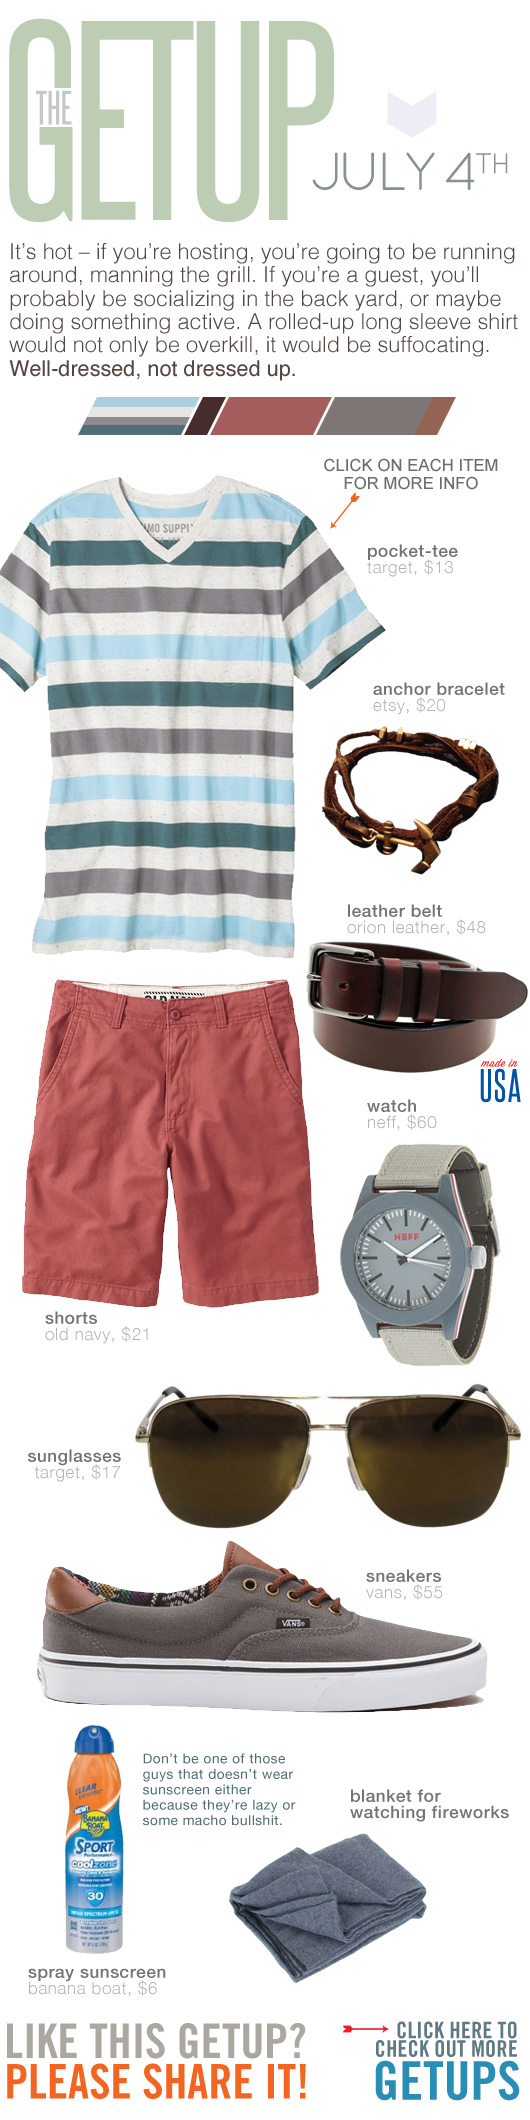 Getup July 4th - Striped t-shirt, pink shorts, gray sneakers